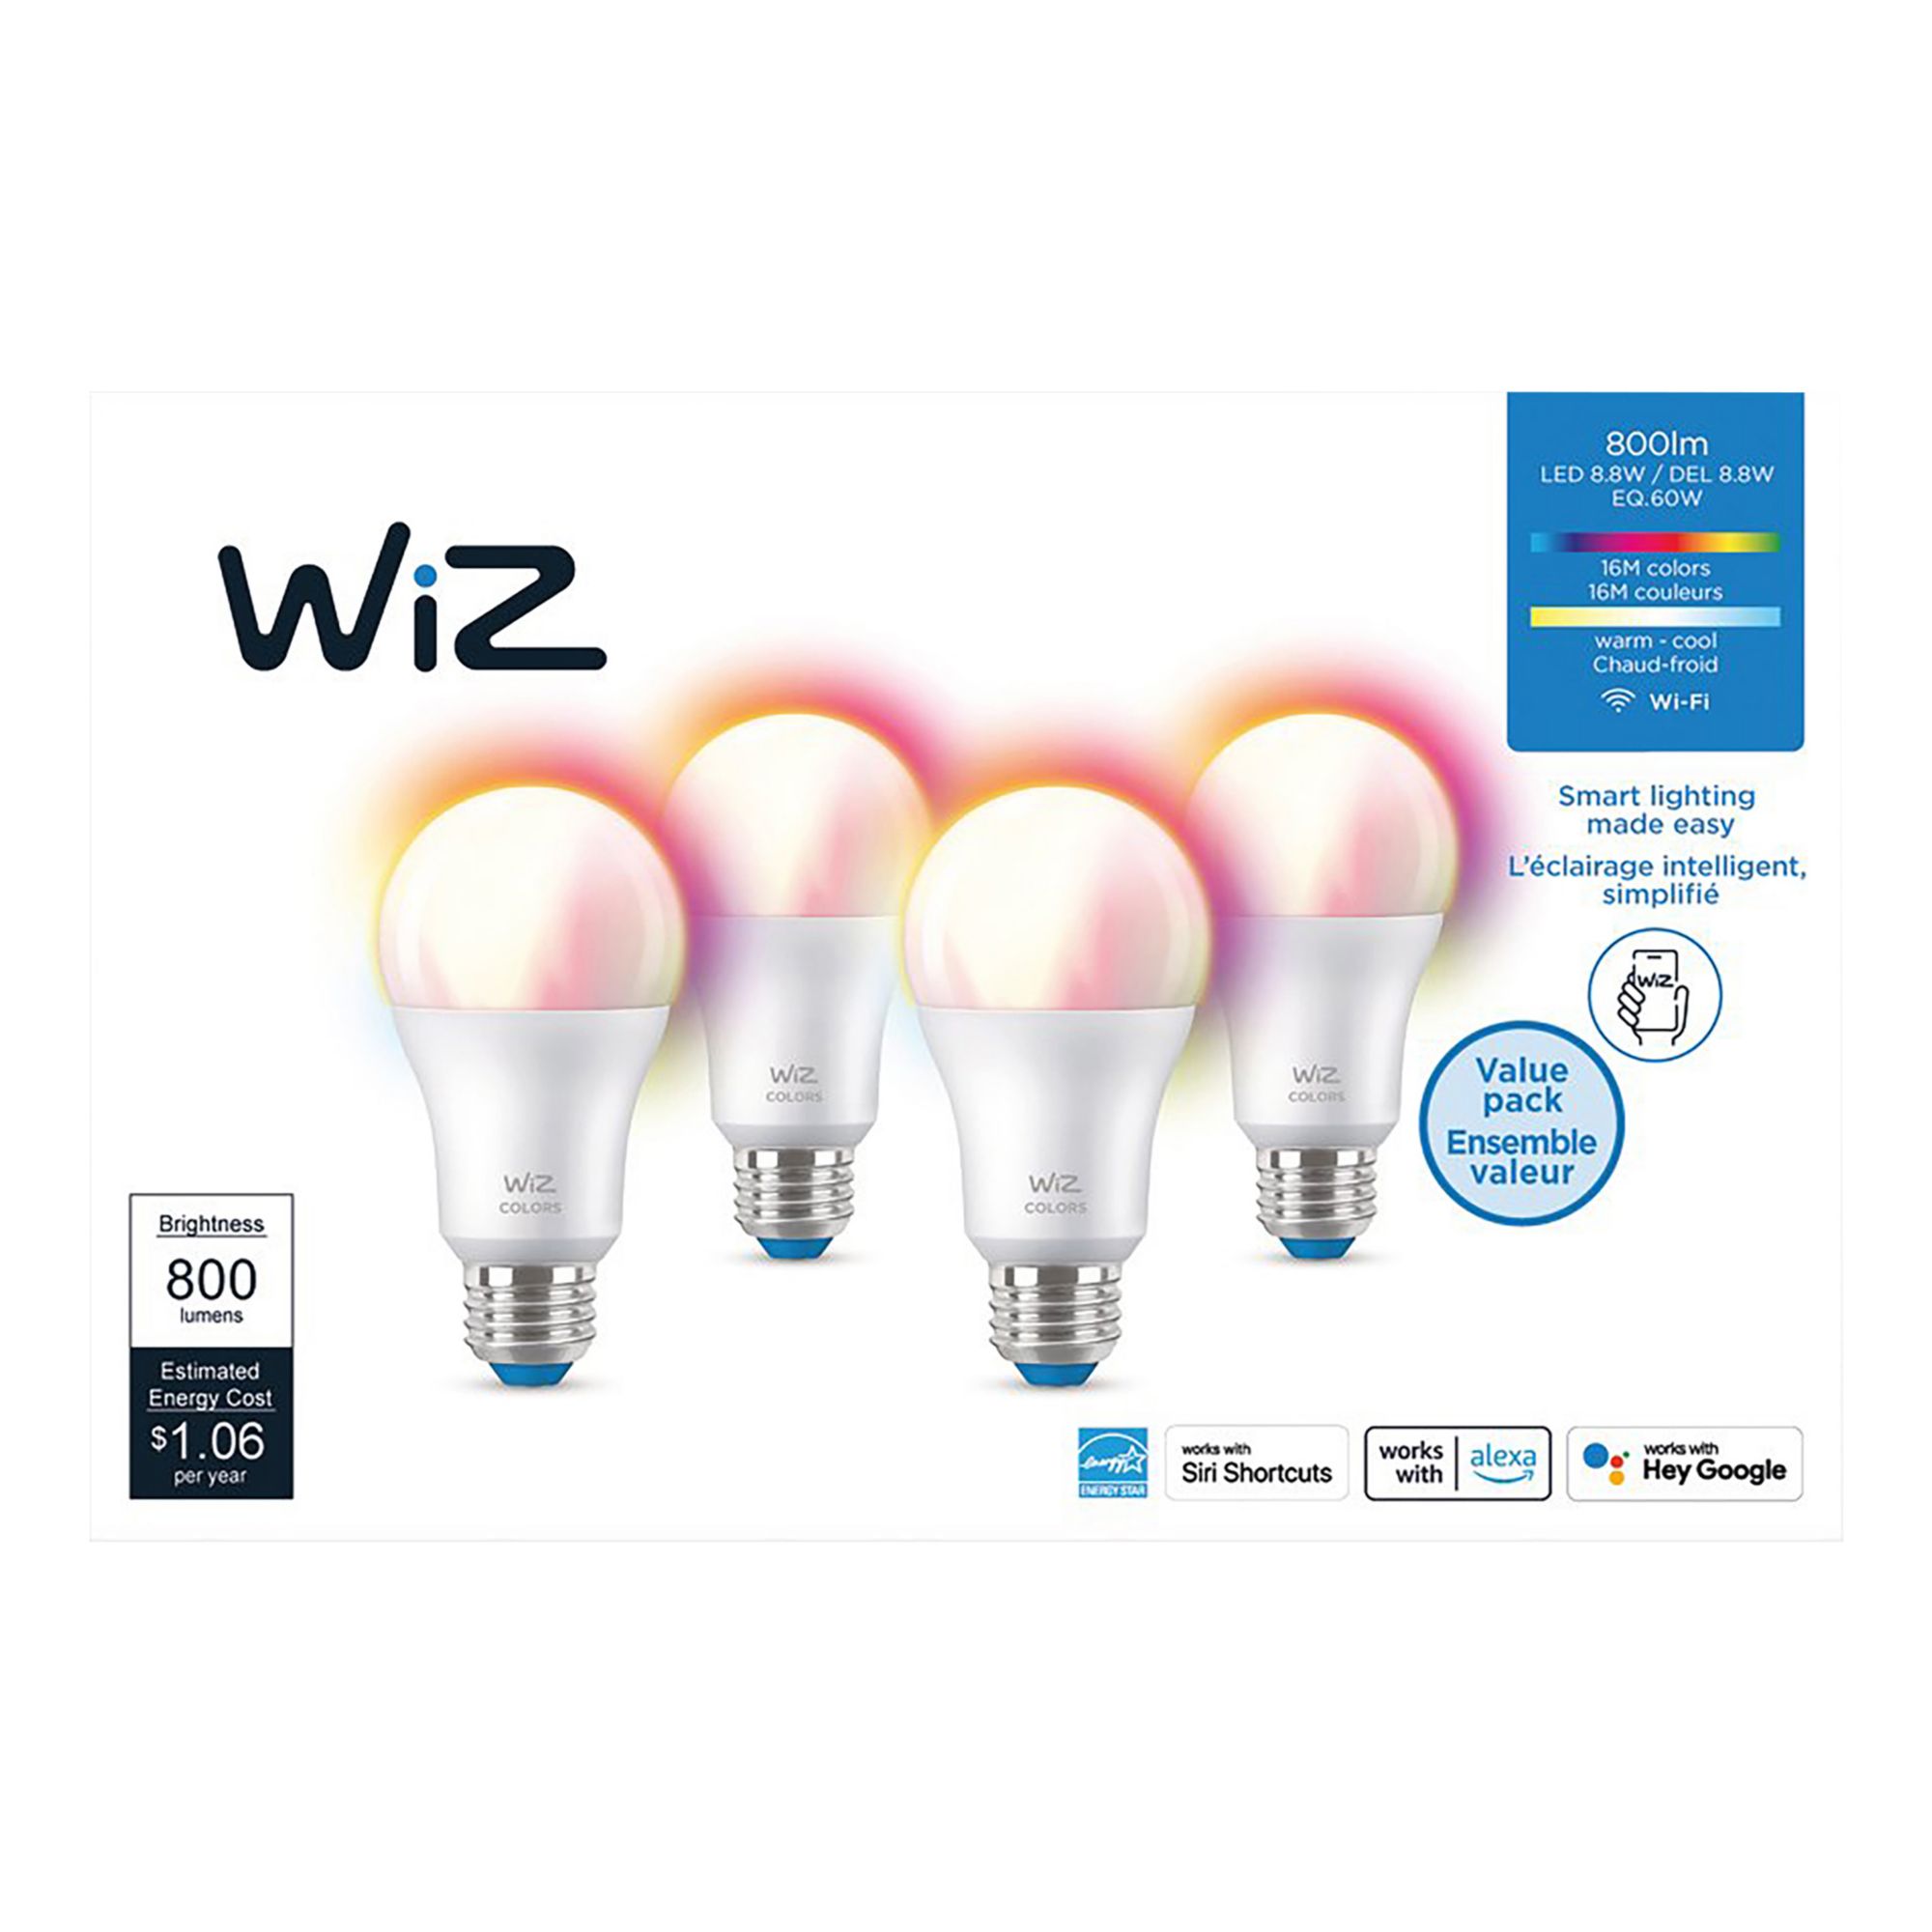 Philips Hue Smart 60W A19 LED Bulb - White and Color Ambiance  Color-Changing Light - 2 Pack 